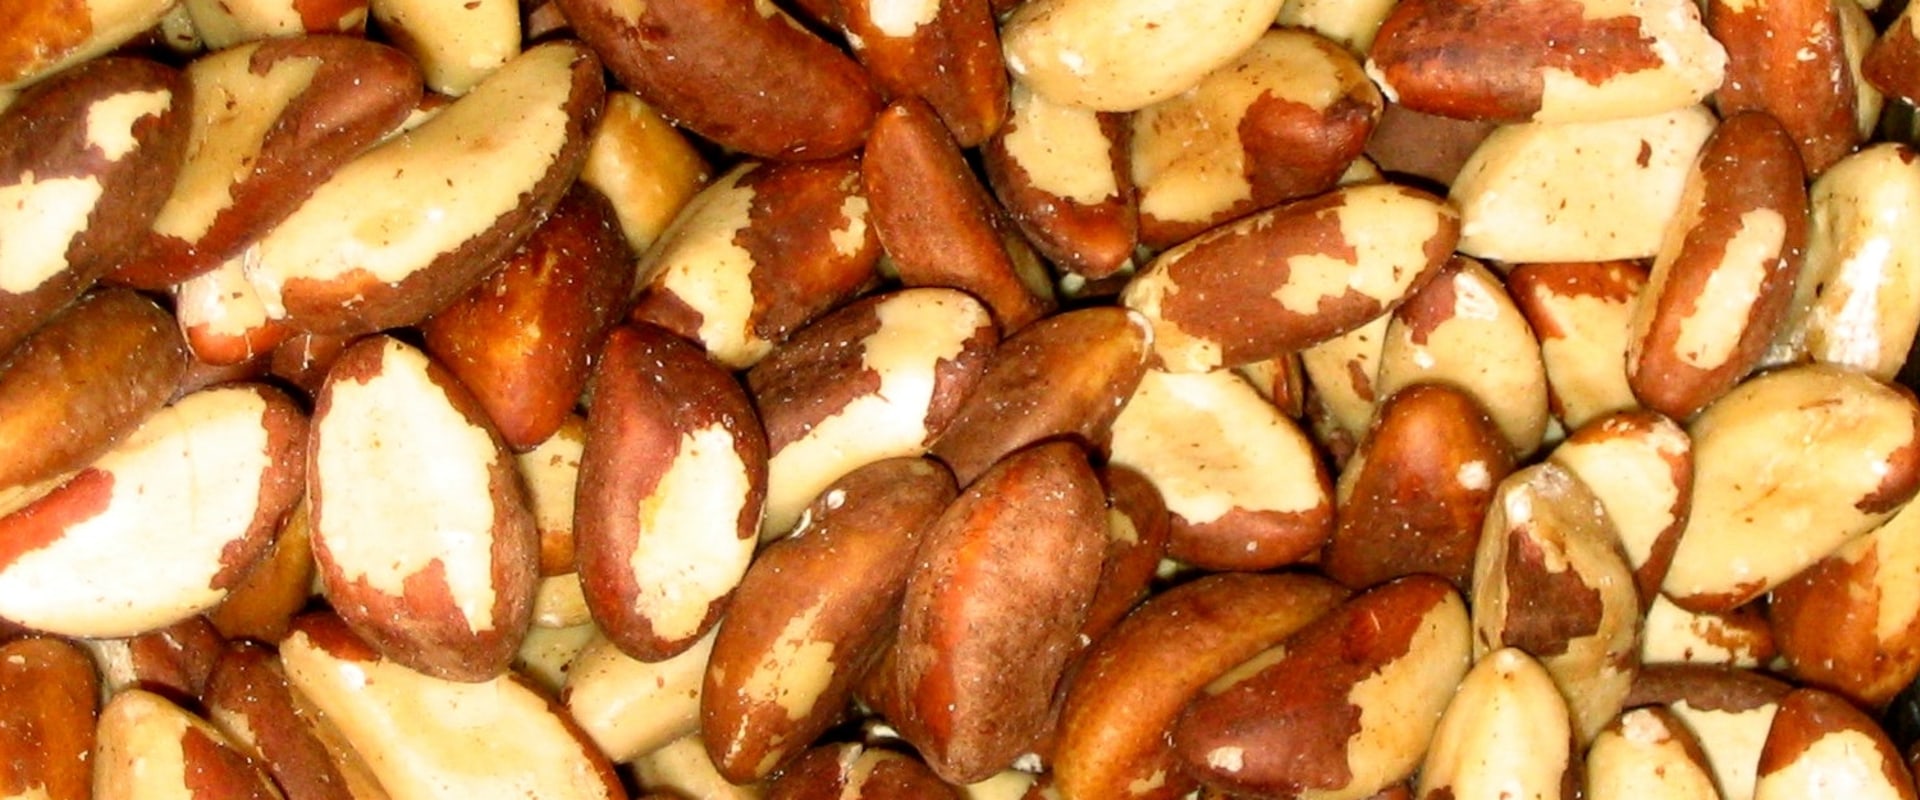 Are brazil nuts in short supply?